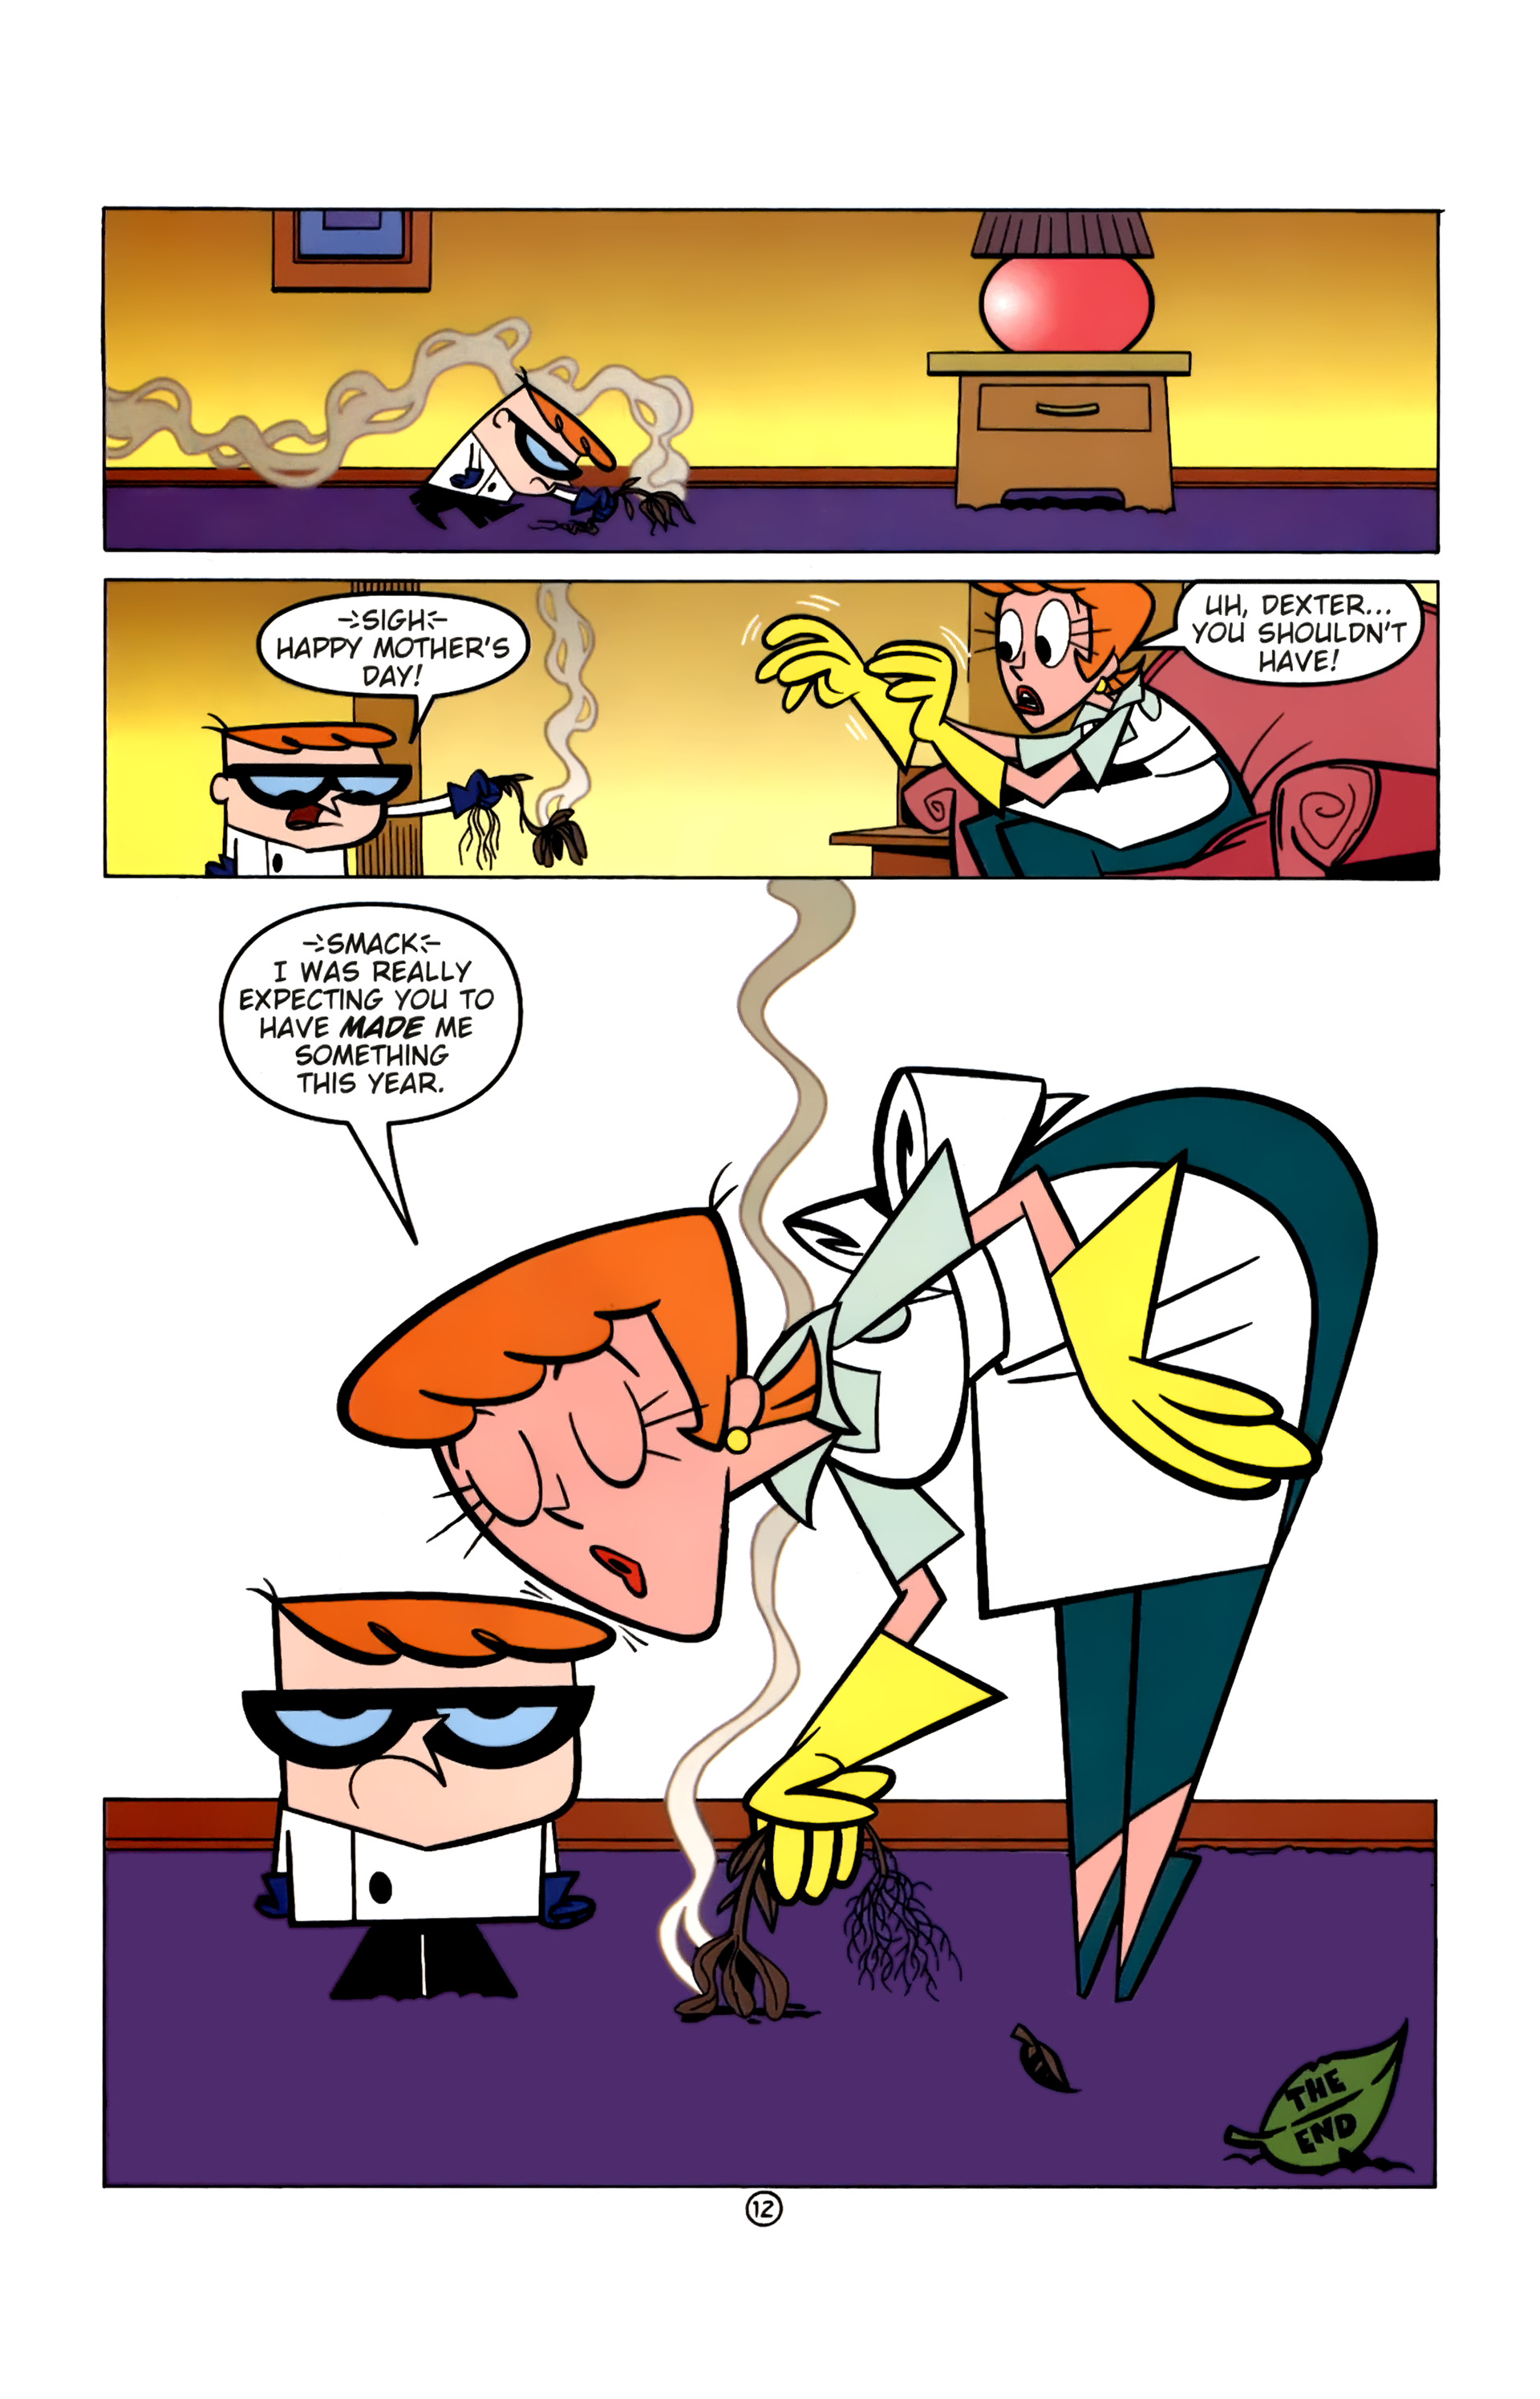 Tip: Click on the Dexters Laboratory 22 comic image to go to the next page....